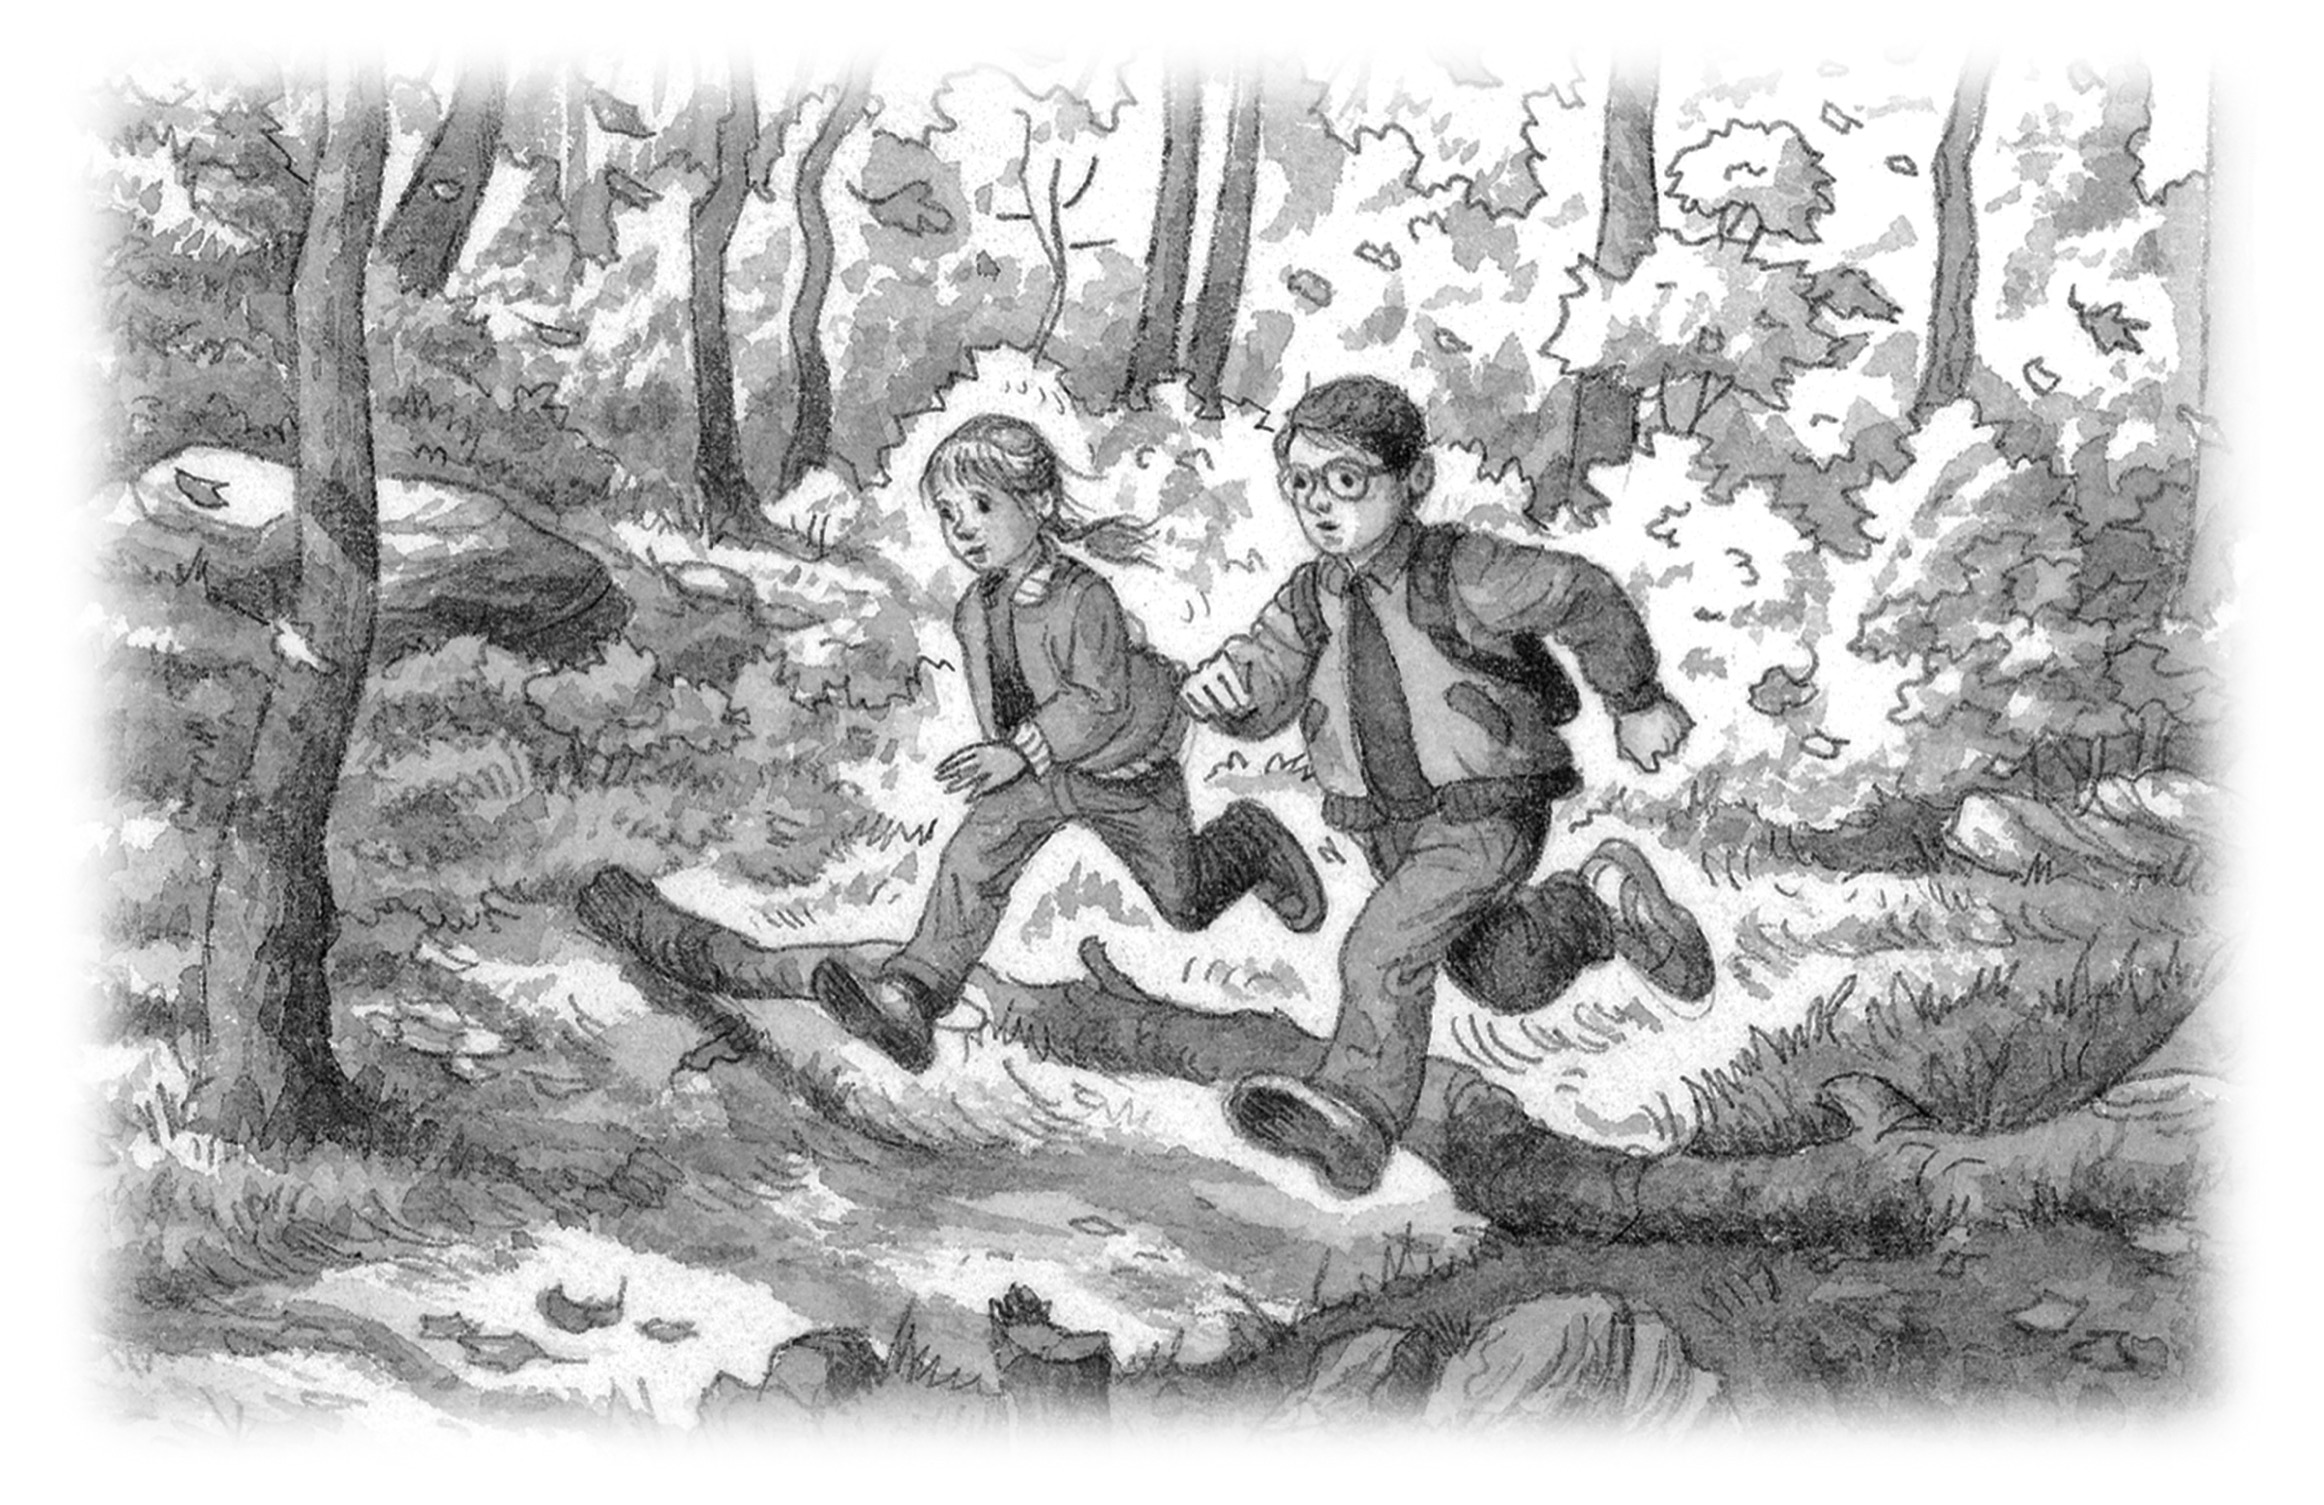 Jack and Annie running through the woods